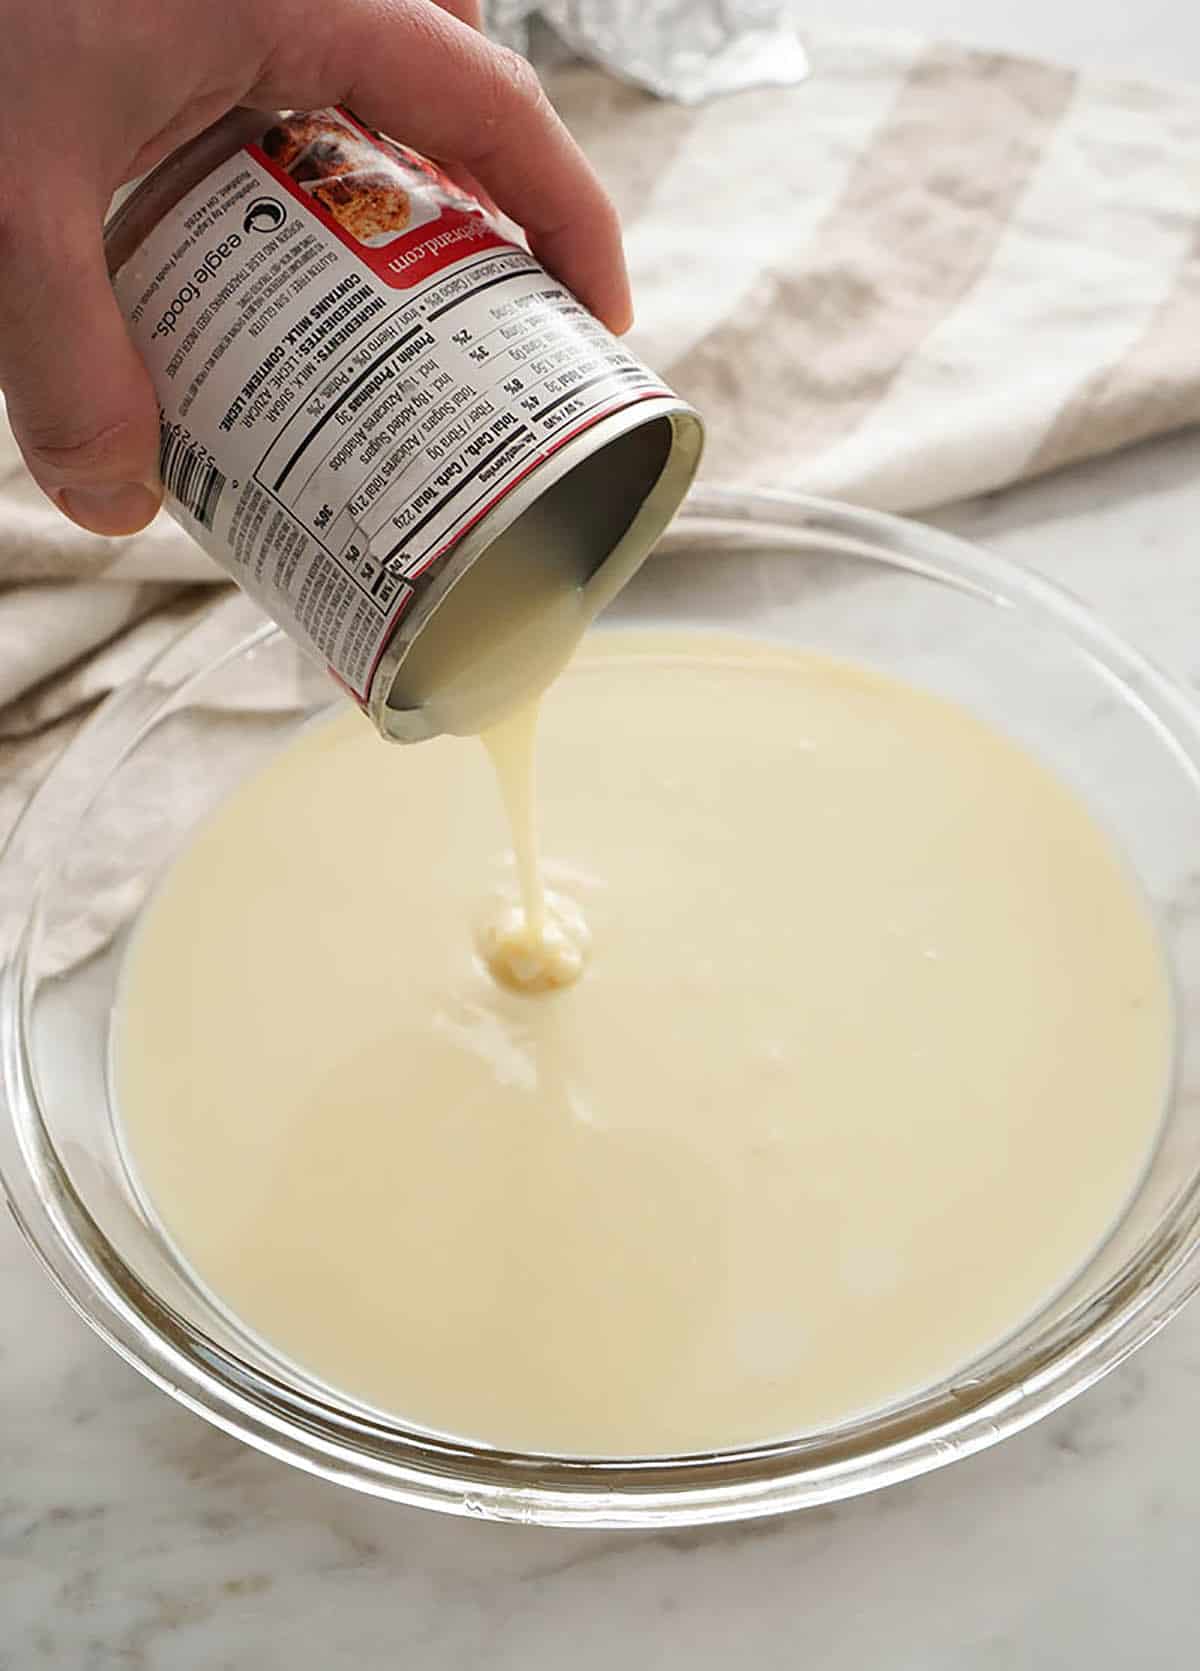 Sweetened condensed milk getting poured into a pie dish.